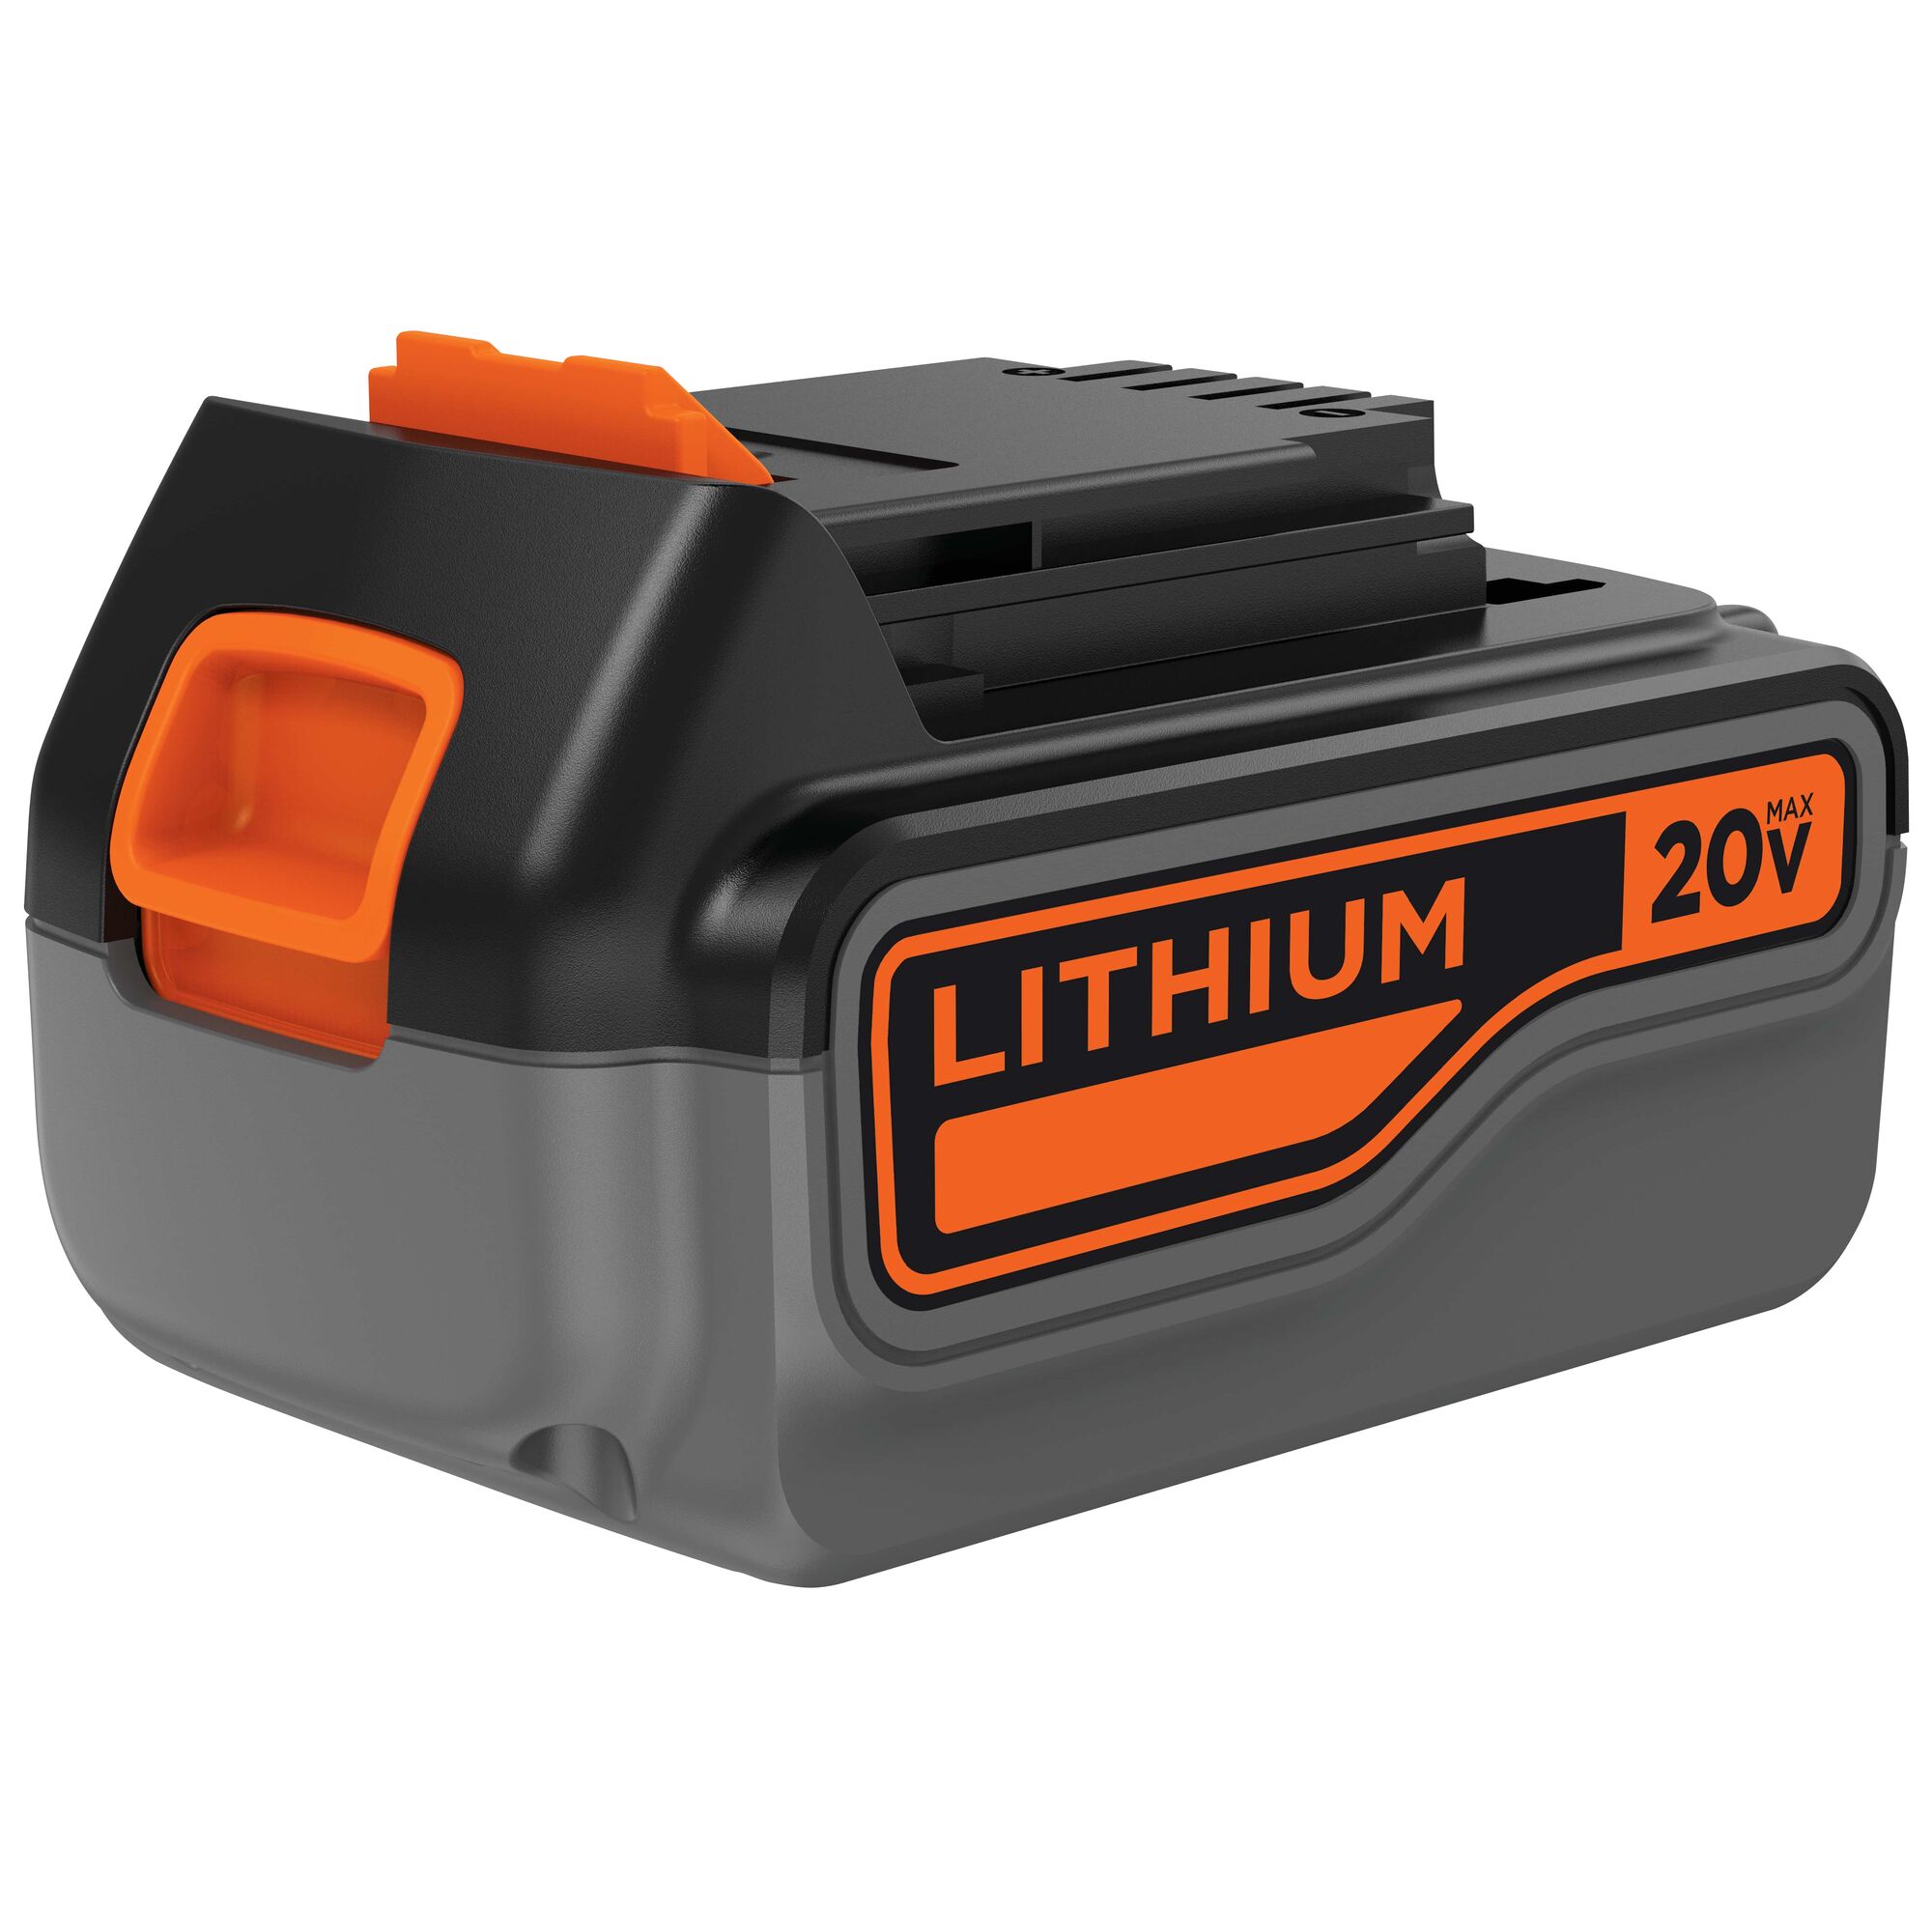 20 Volt MAX 3 Amp hours Lithium Ion Battery.